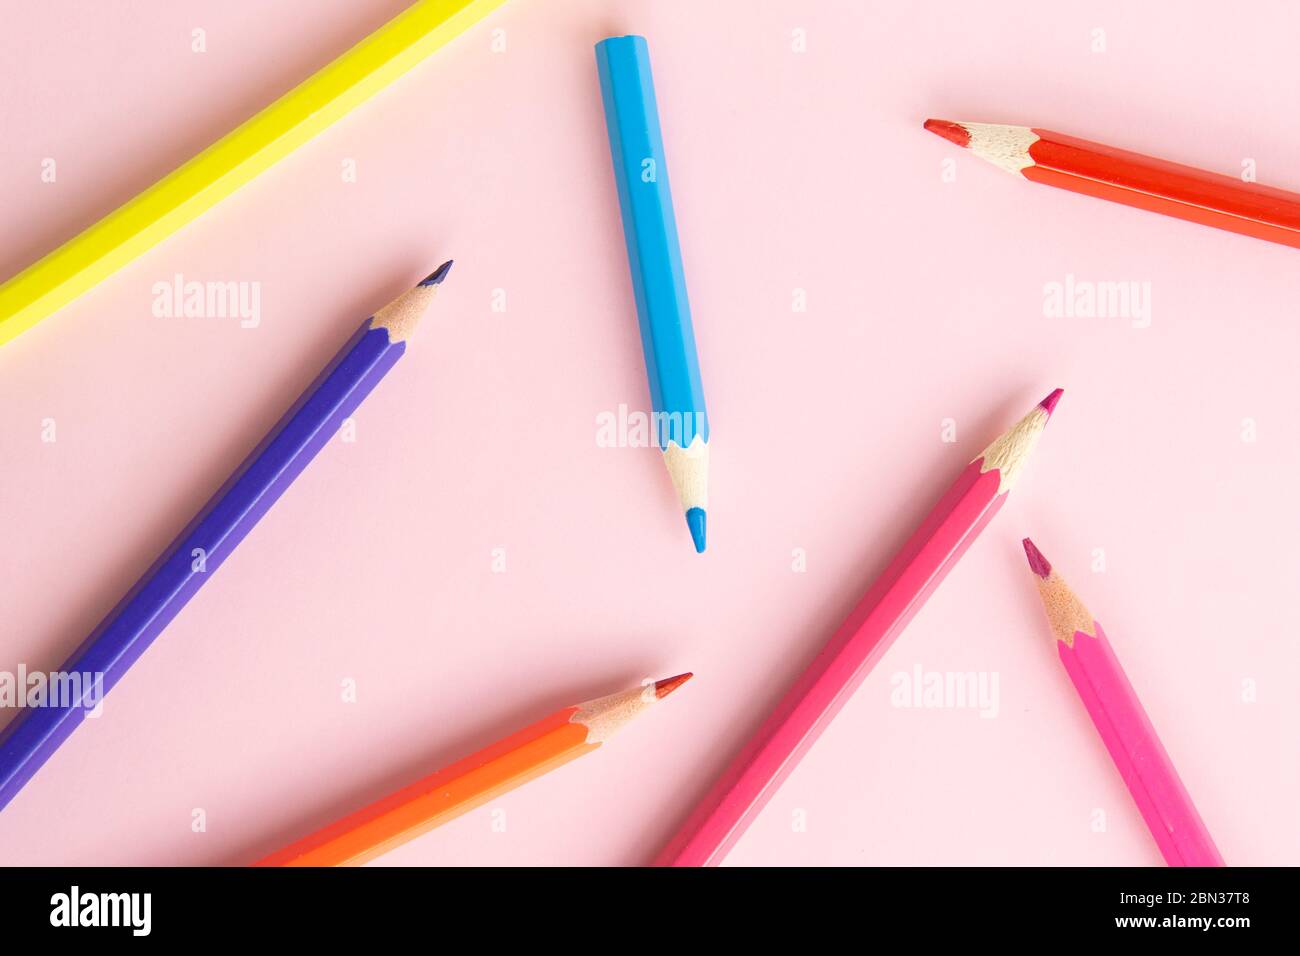 Background image of colorful pencils. Pencils on pink background. Back to school, education and learning concept. Minimalist isometric concept. Stock Photo